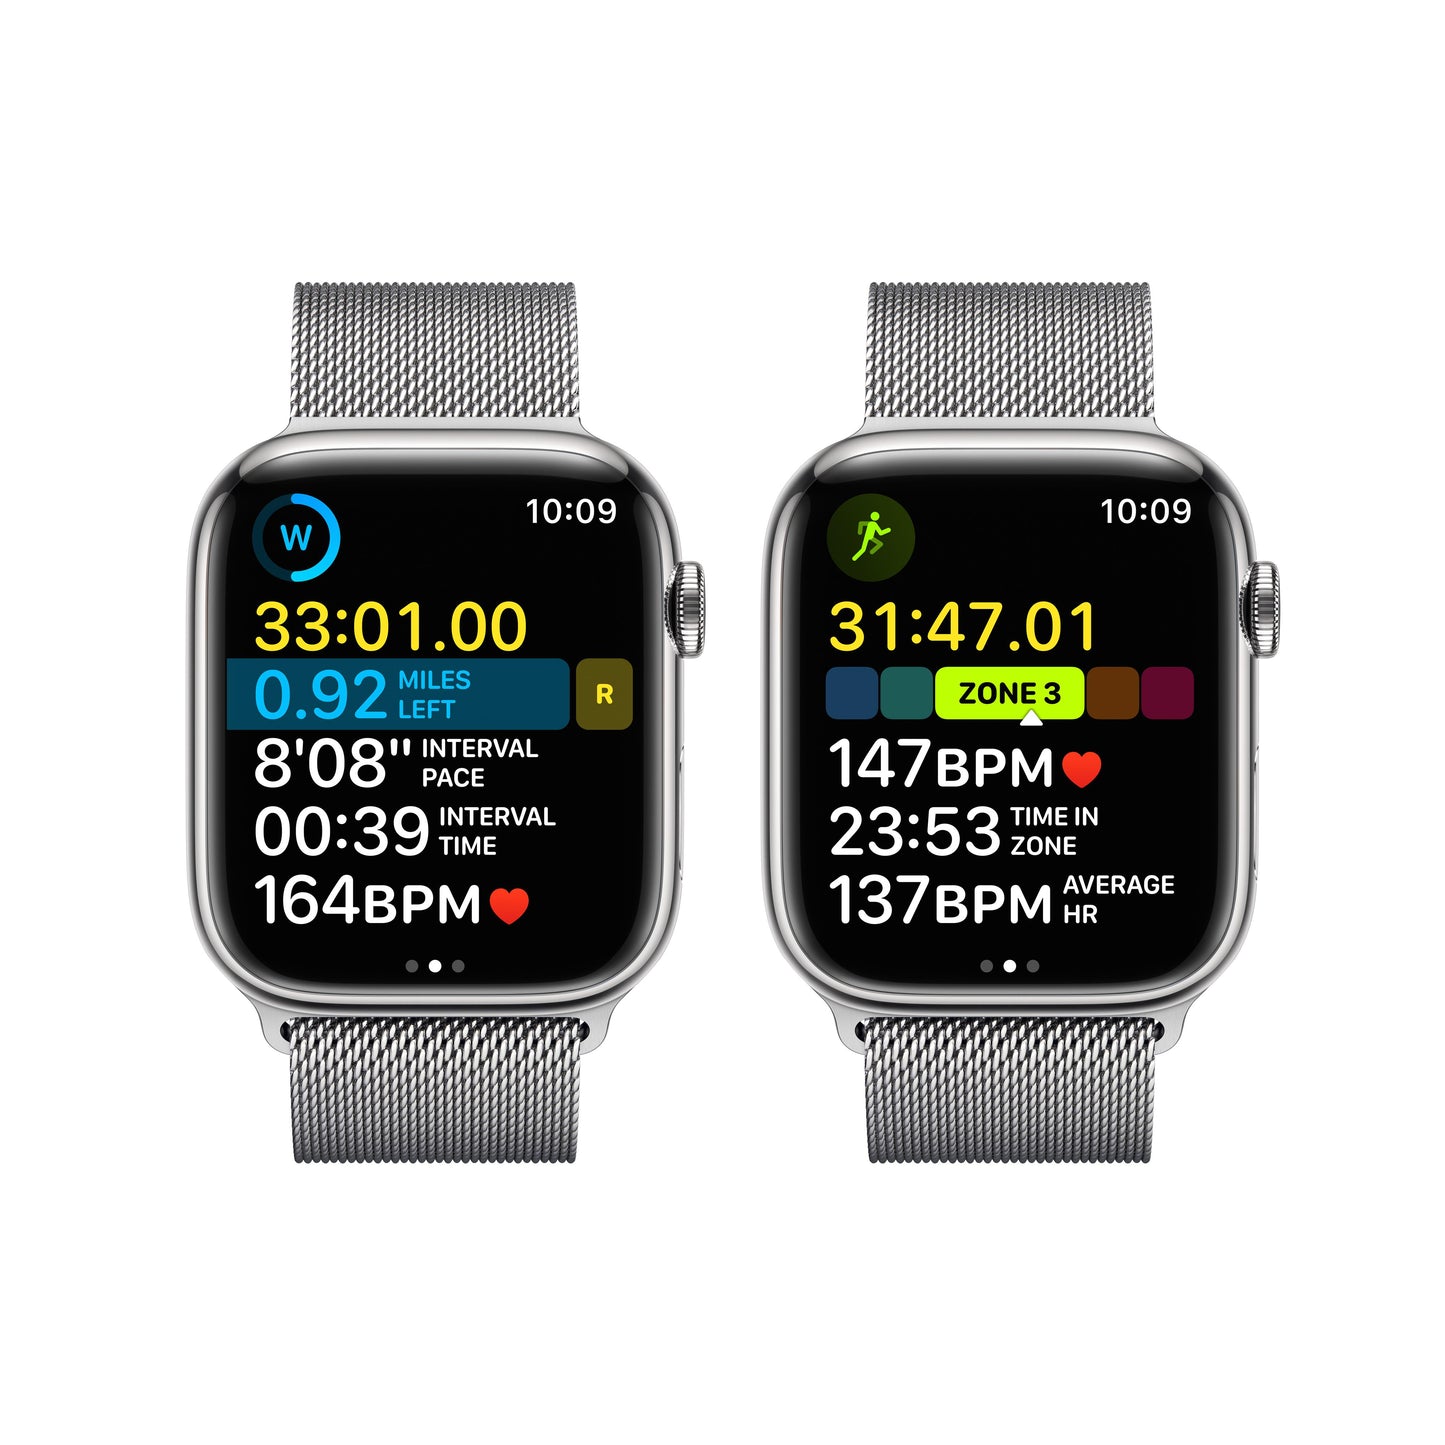 Apple Watch Series 8 GPS + Cellular 45mm Silver Stainless Steel Case with Silver Milanese Loop